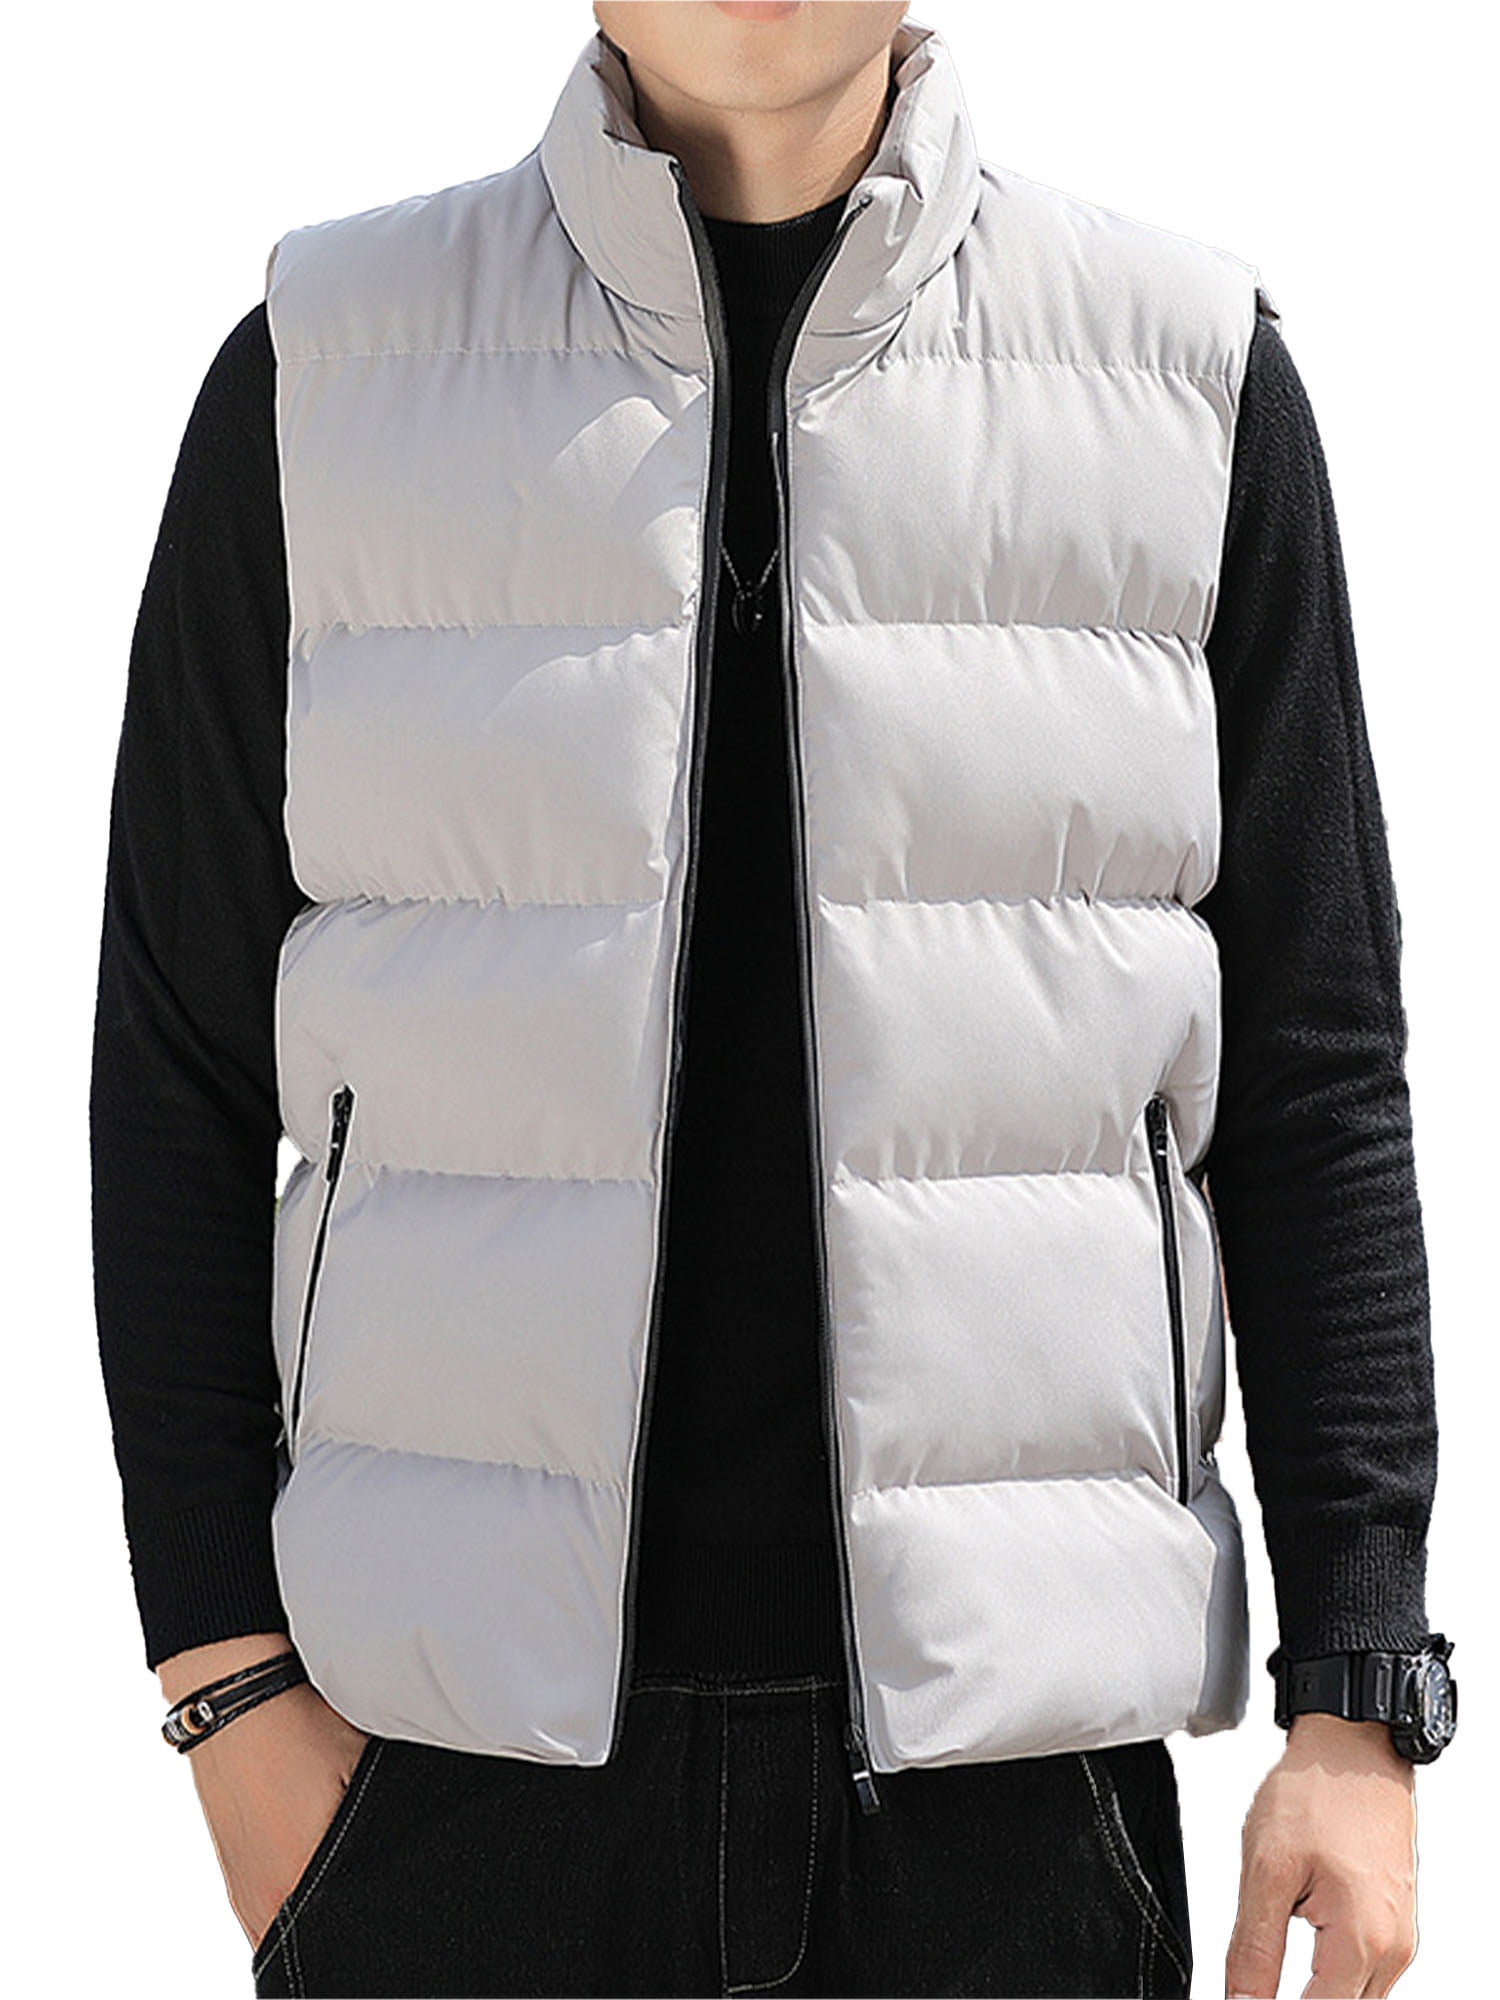 Men's Sleeveless Vest Homme Winter Casual Coats Male Cotton-Padded Thickening Ve